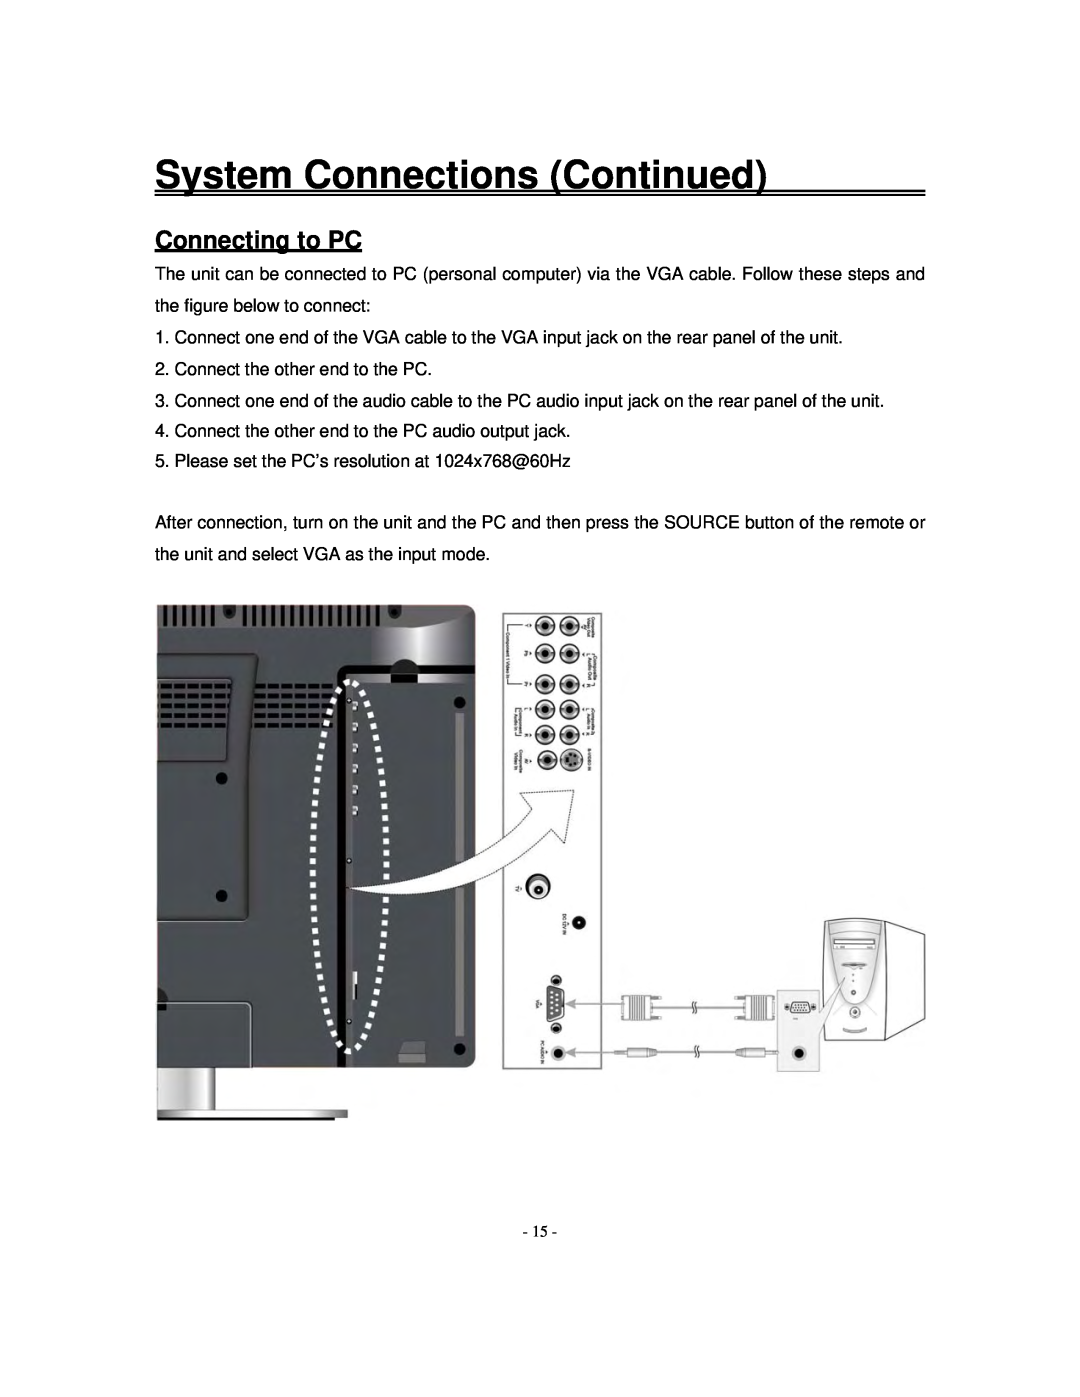 Polaroid FXM-1911C manual Connecting to PC, System Connections Continued 